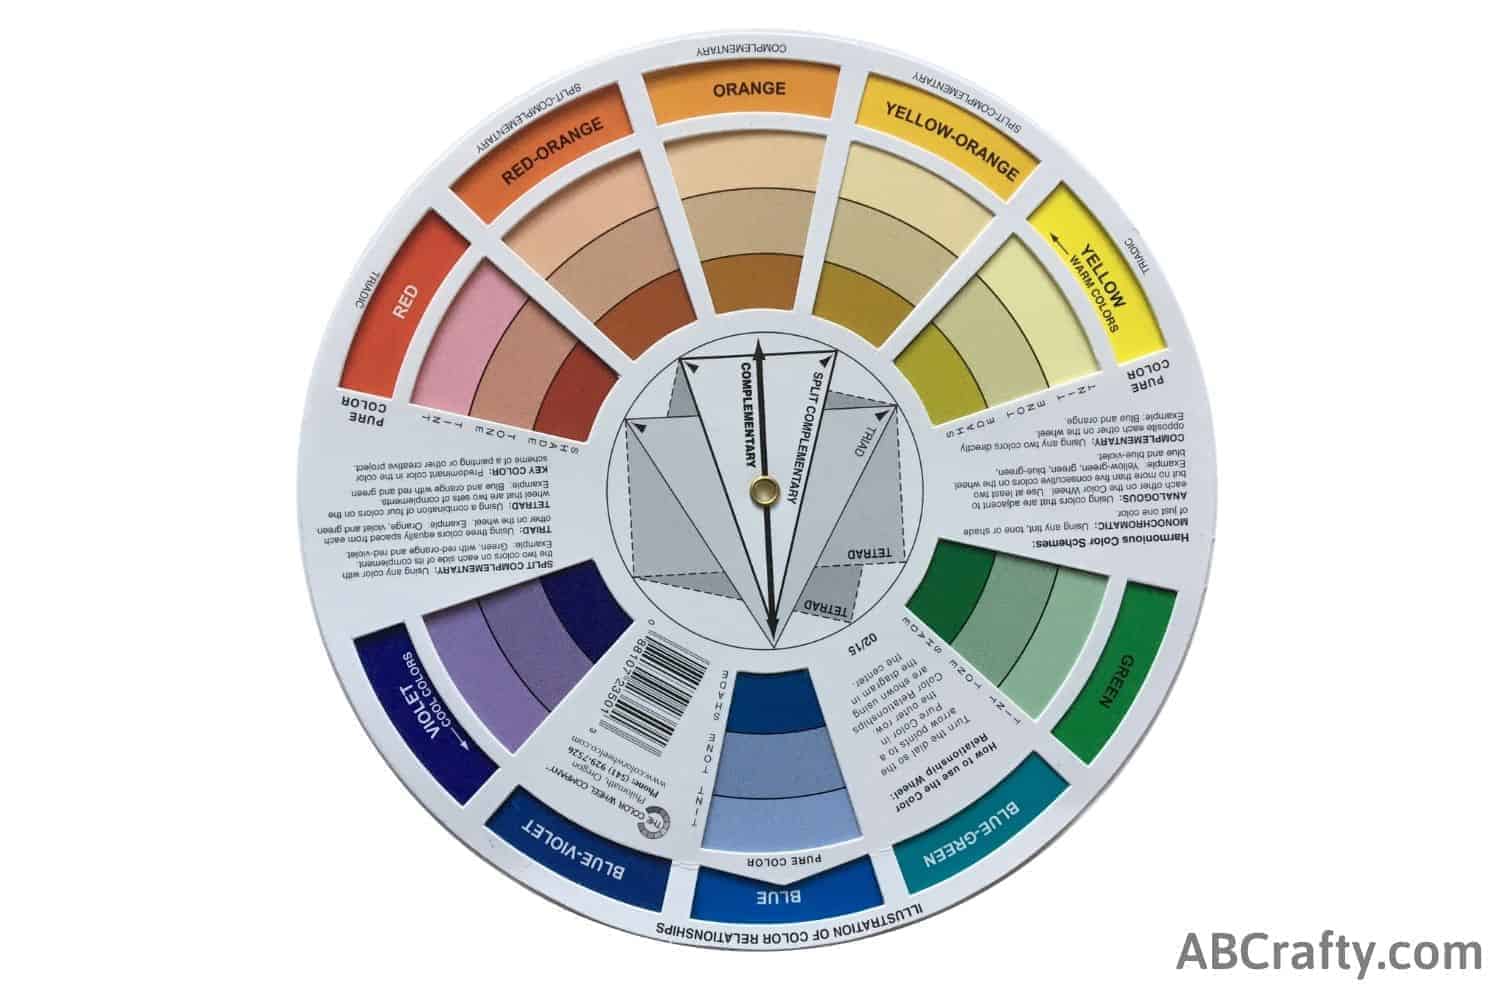 color wheel showing complimenting colors of blue and brown